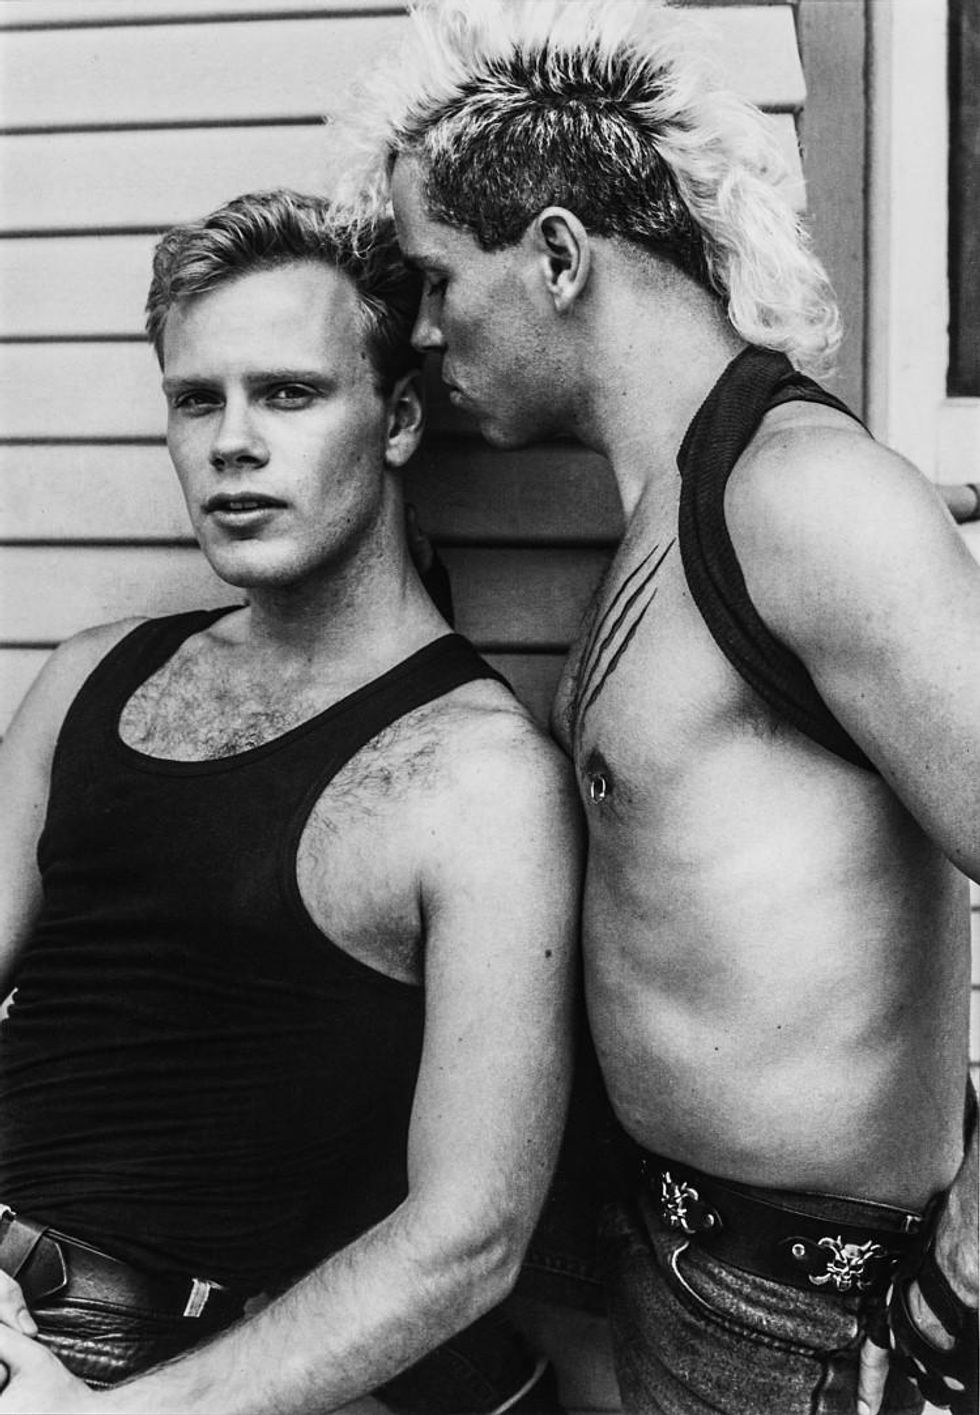 The Tom of Finland Foundation and Fotografiska Museum present 'The Darkroom' exhibition of Tom of Finland's never-before-exhibited early works in New York City for Pride 2021.